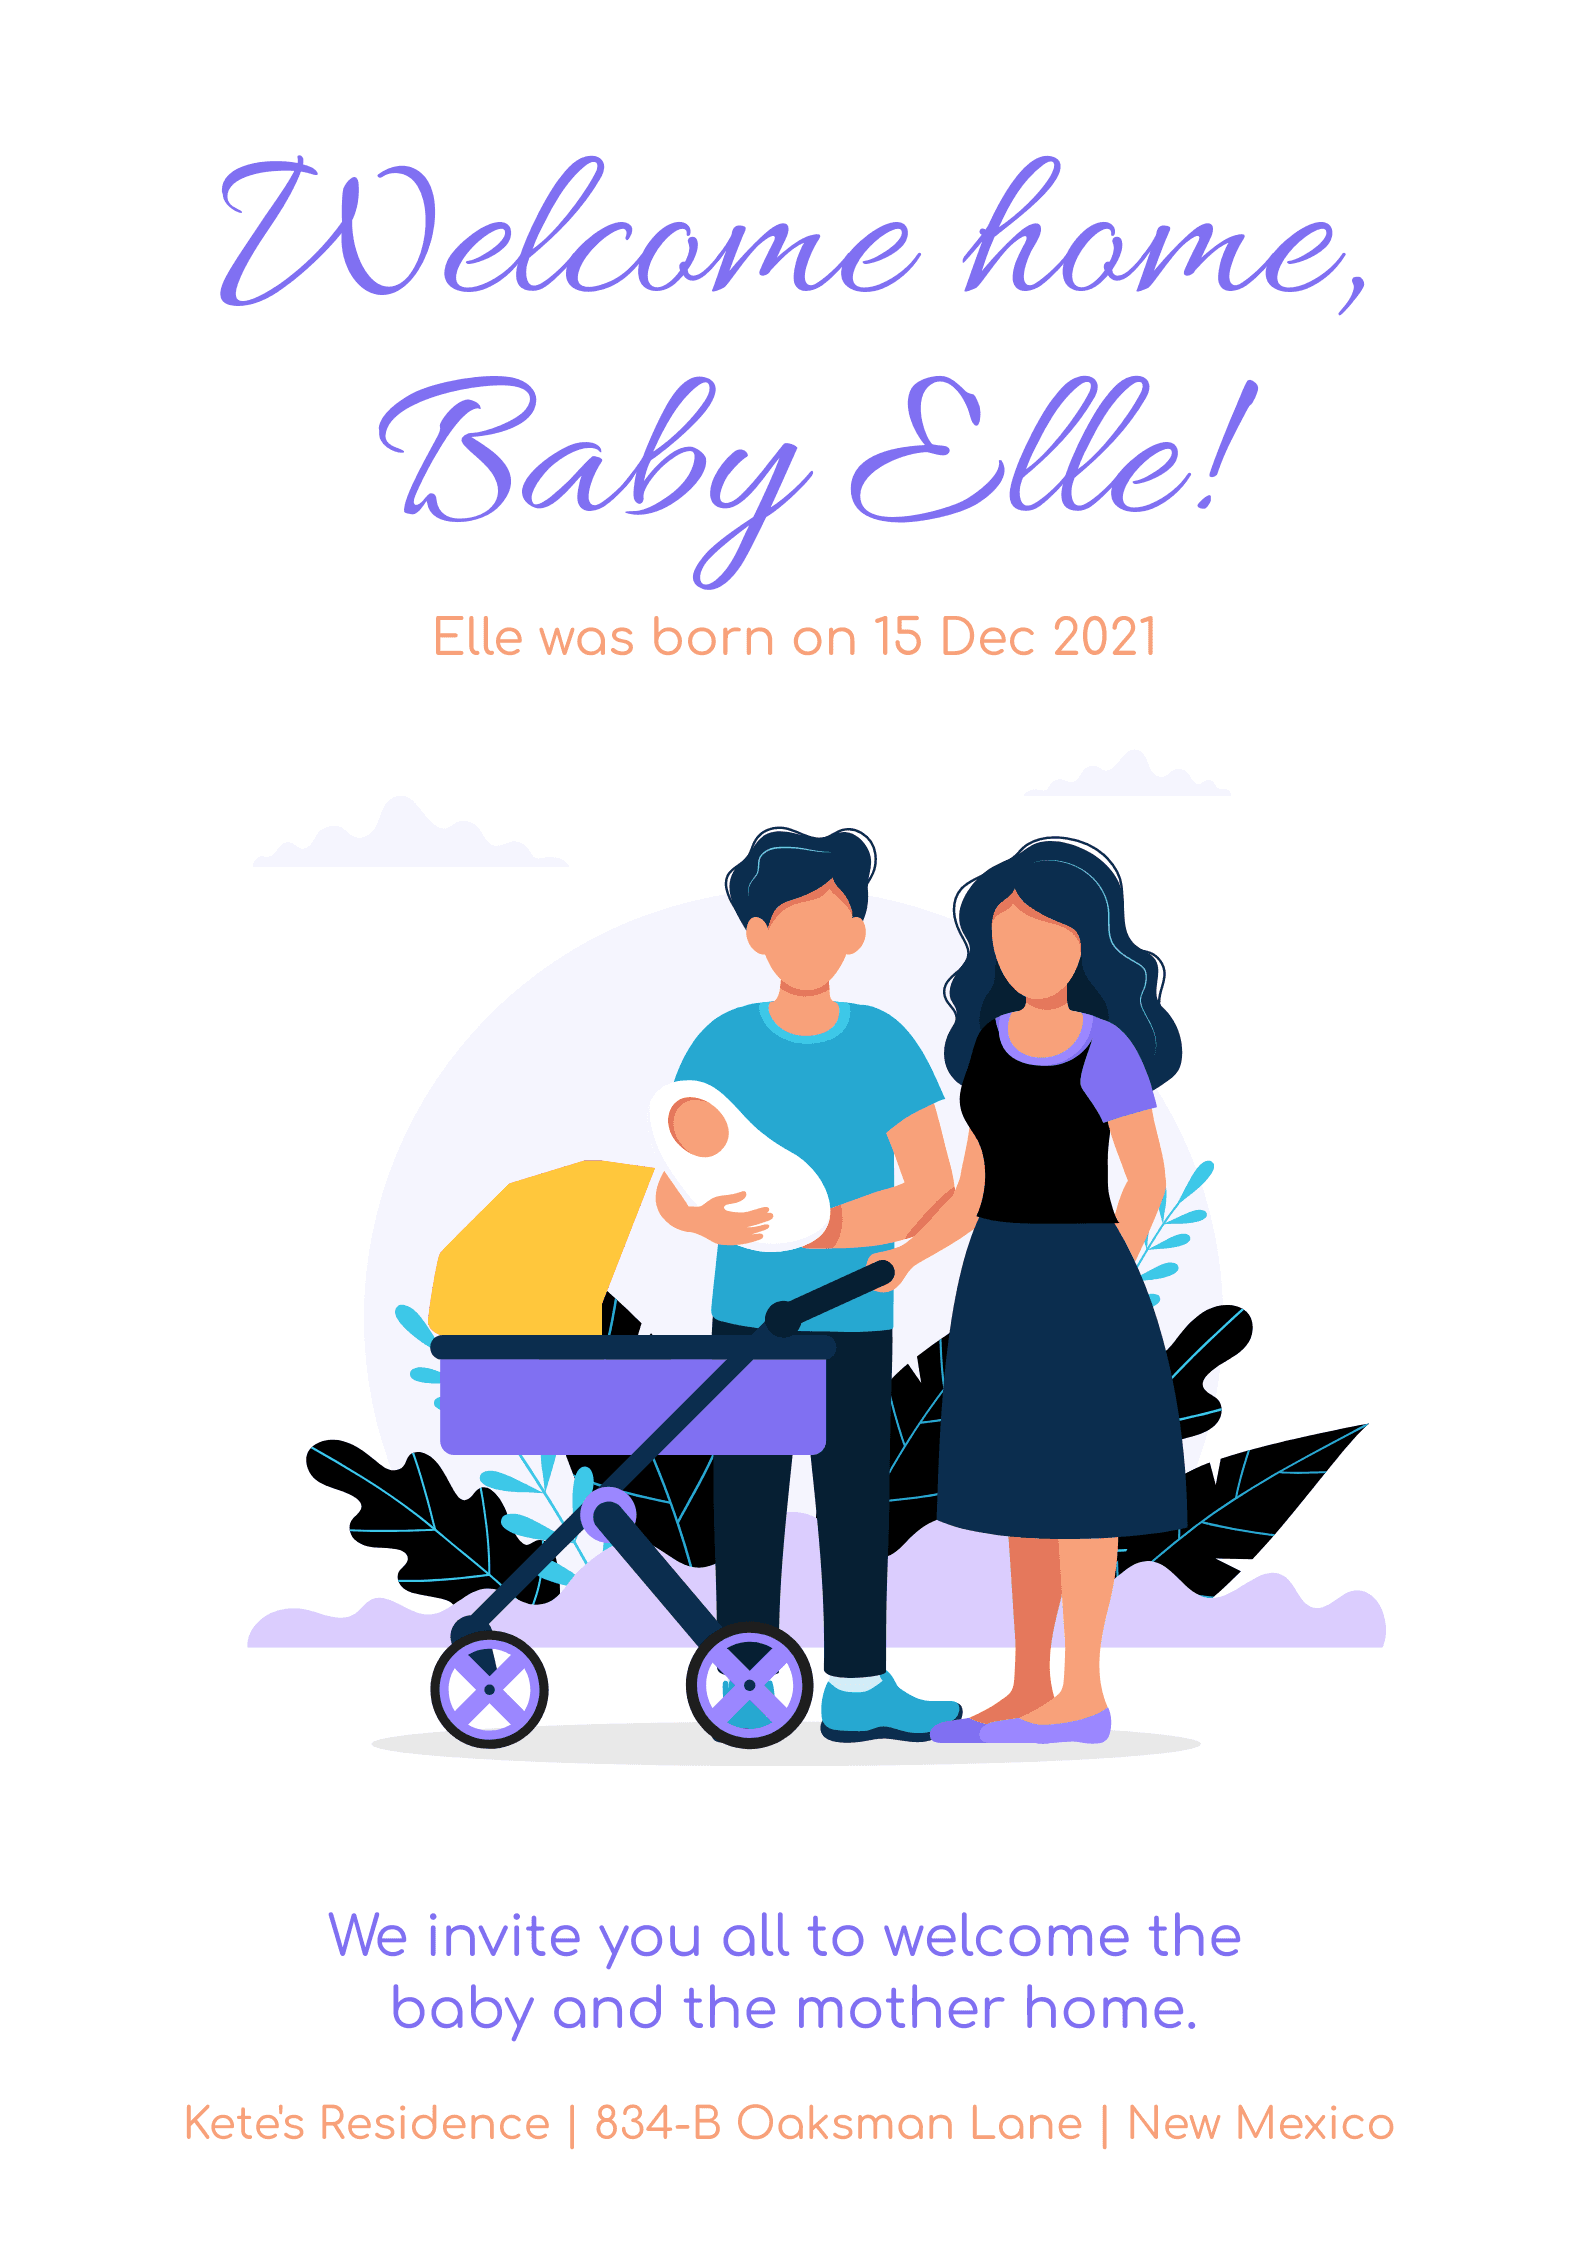 parents-with-their-baby-welcome-home-baby-illustrated-poster-template-thumbnail-img